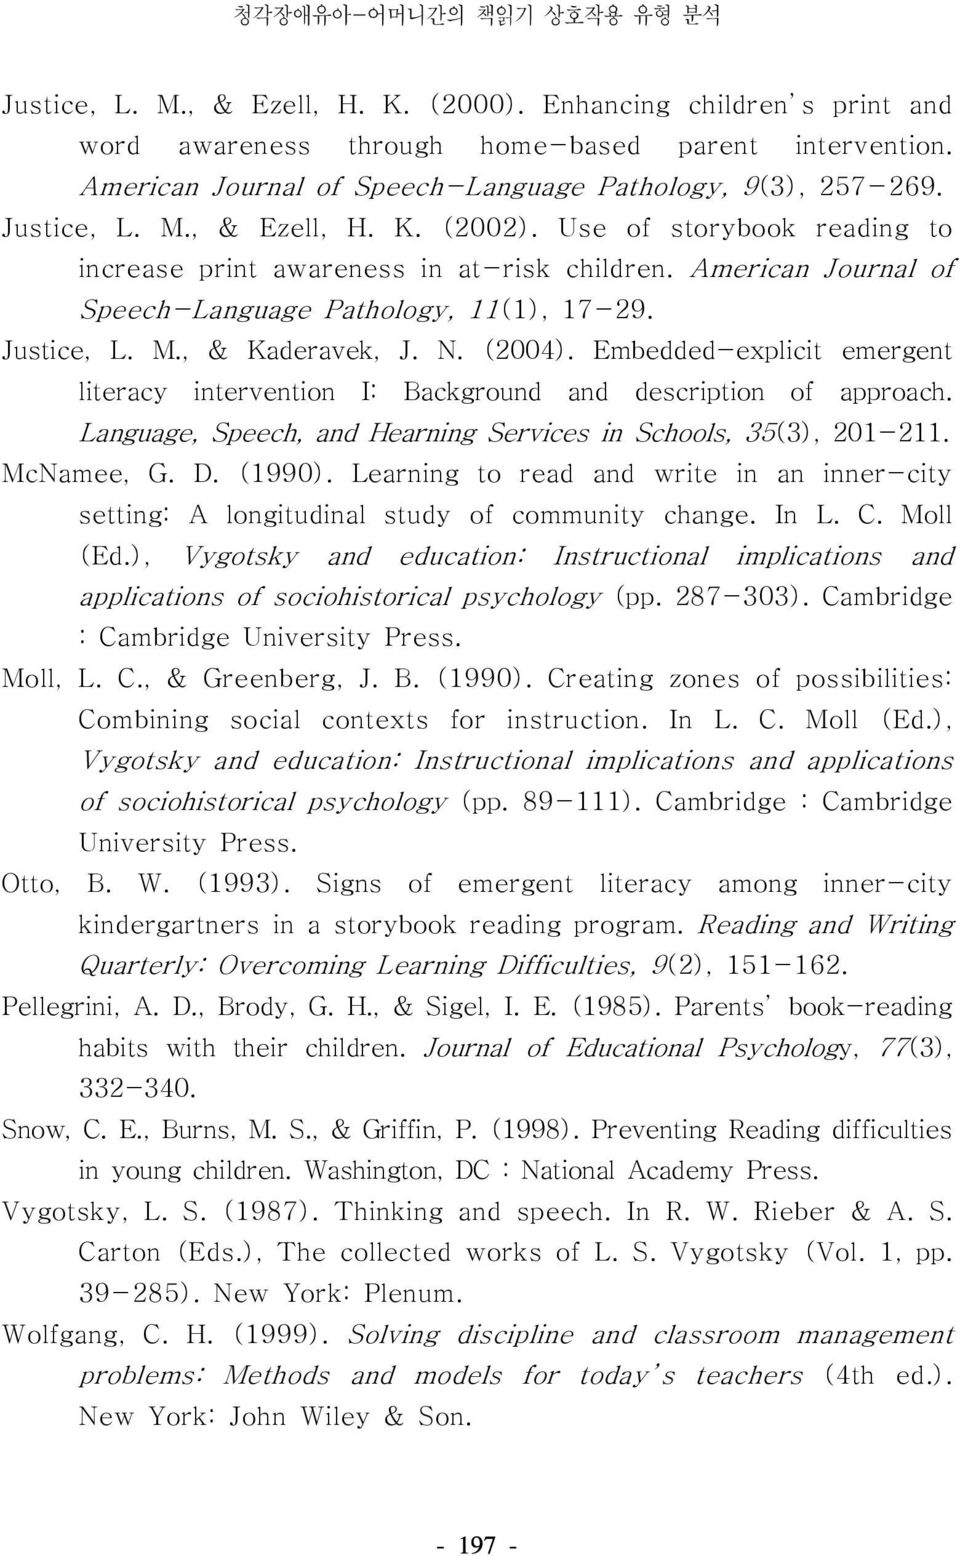 American Journal of Speech-Language Pathology, 11(1), 17-29. Justice, L. M., & Kaderavek, J. N. (2004). Embedded-explicit emergent literacy intervention I: Background and description of approach.